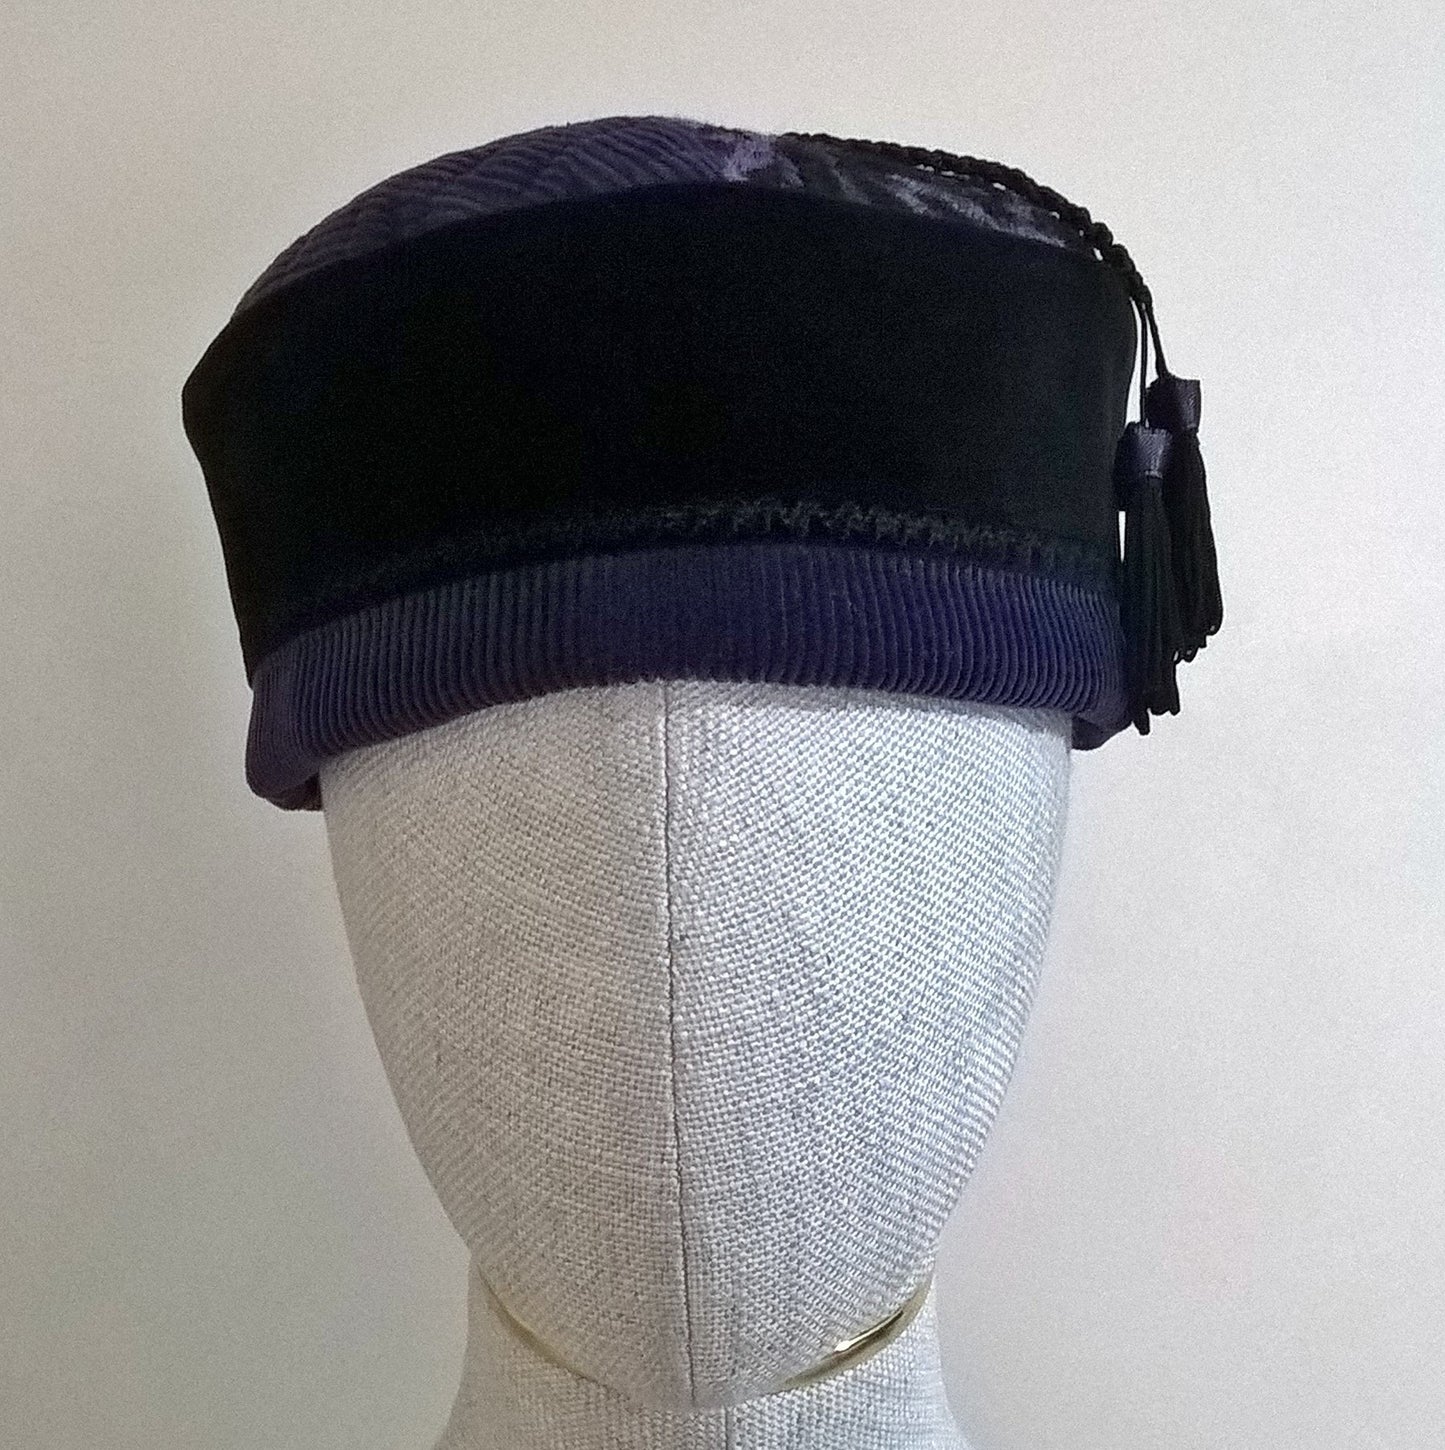 Gothic style pillbox hat handmade in purple corduroy and black velvet, with removable macrame tassel